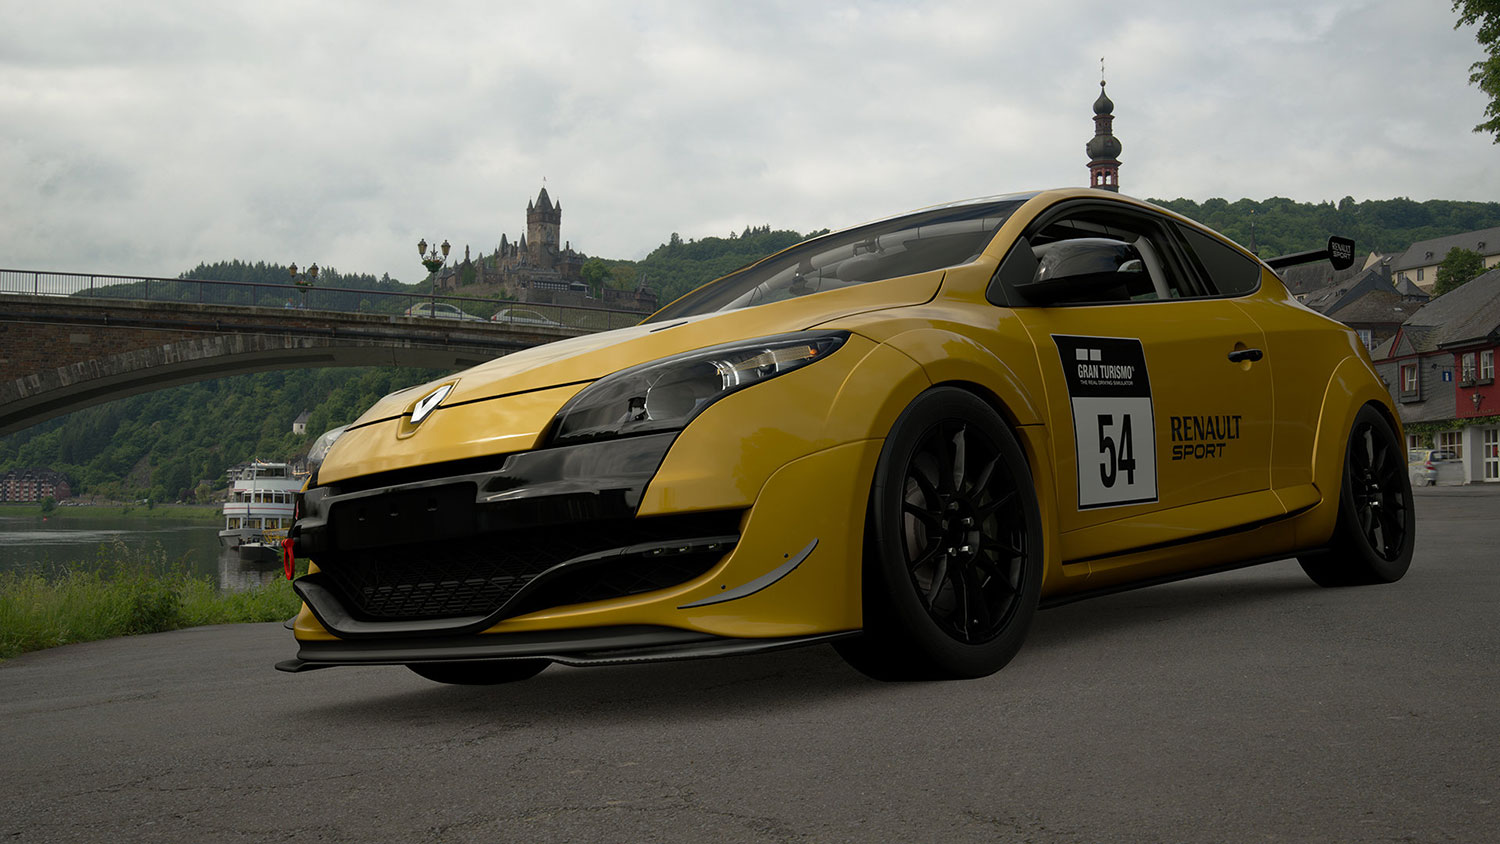 Sony could be planning a Gran Turismo 7 beta, according to website